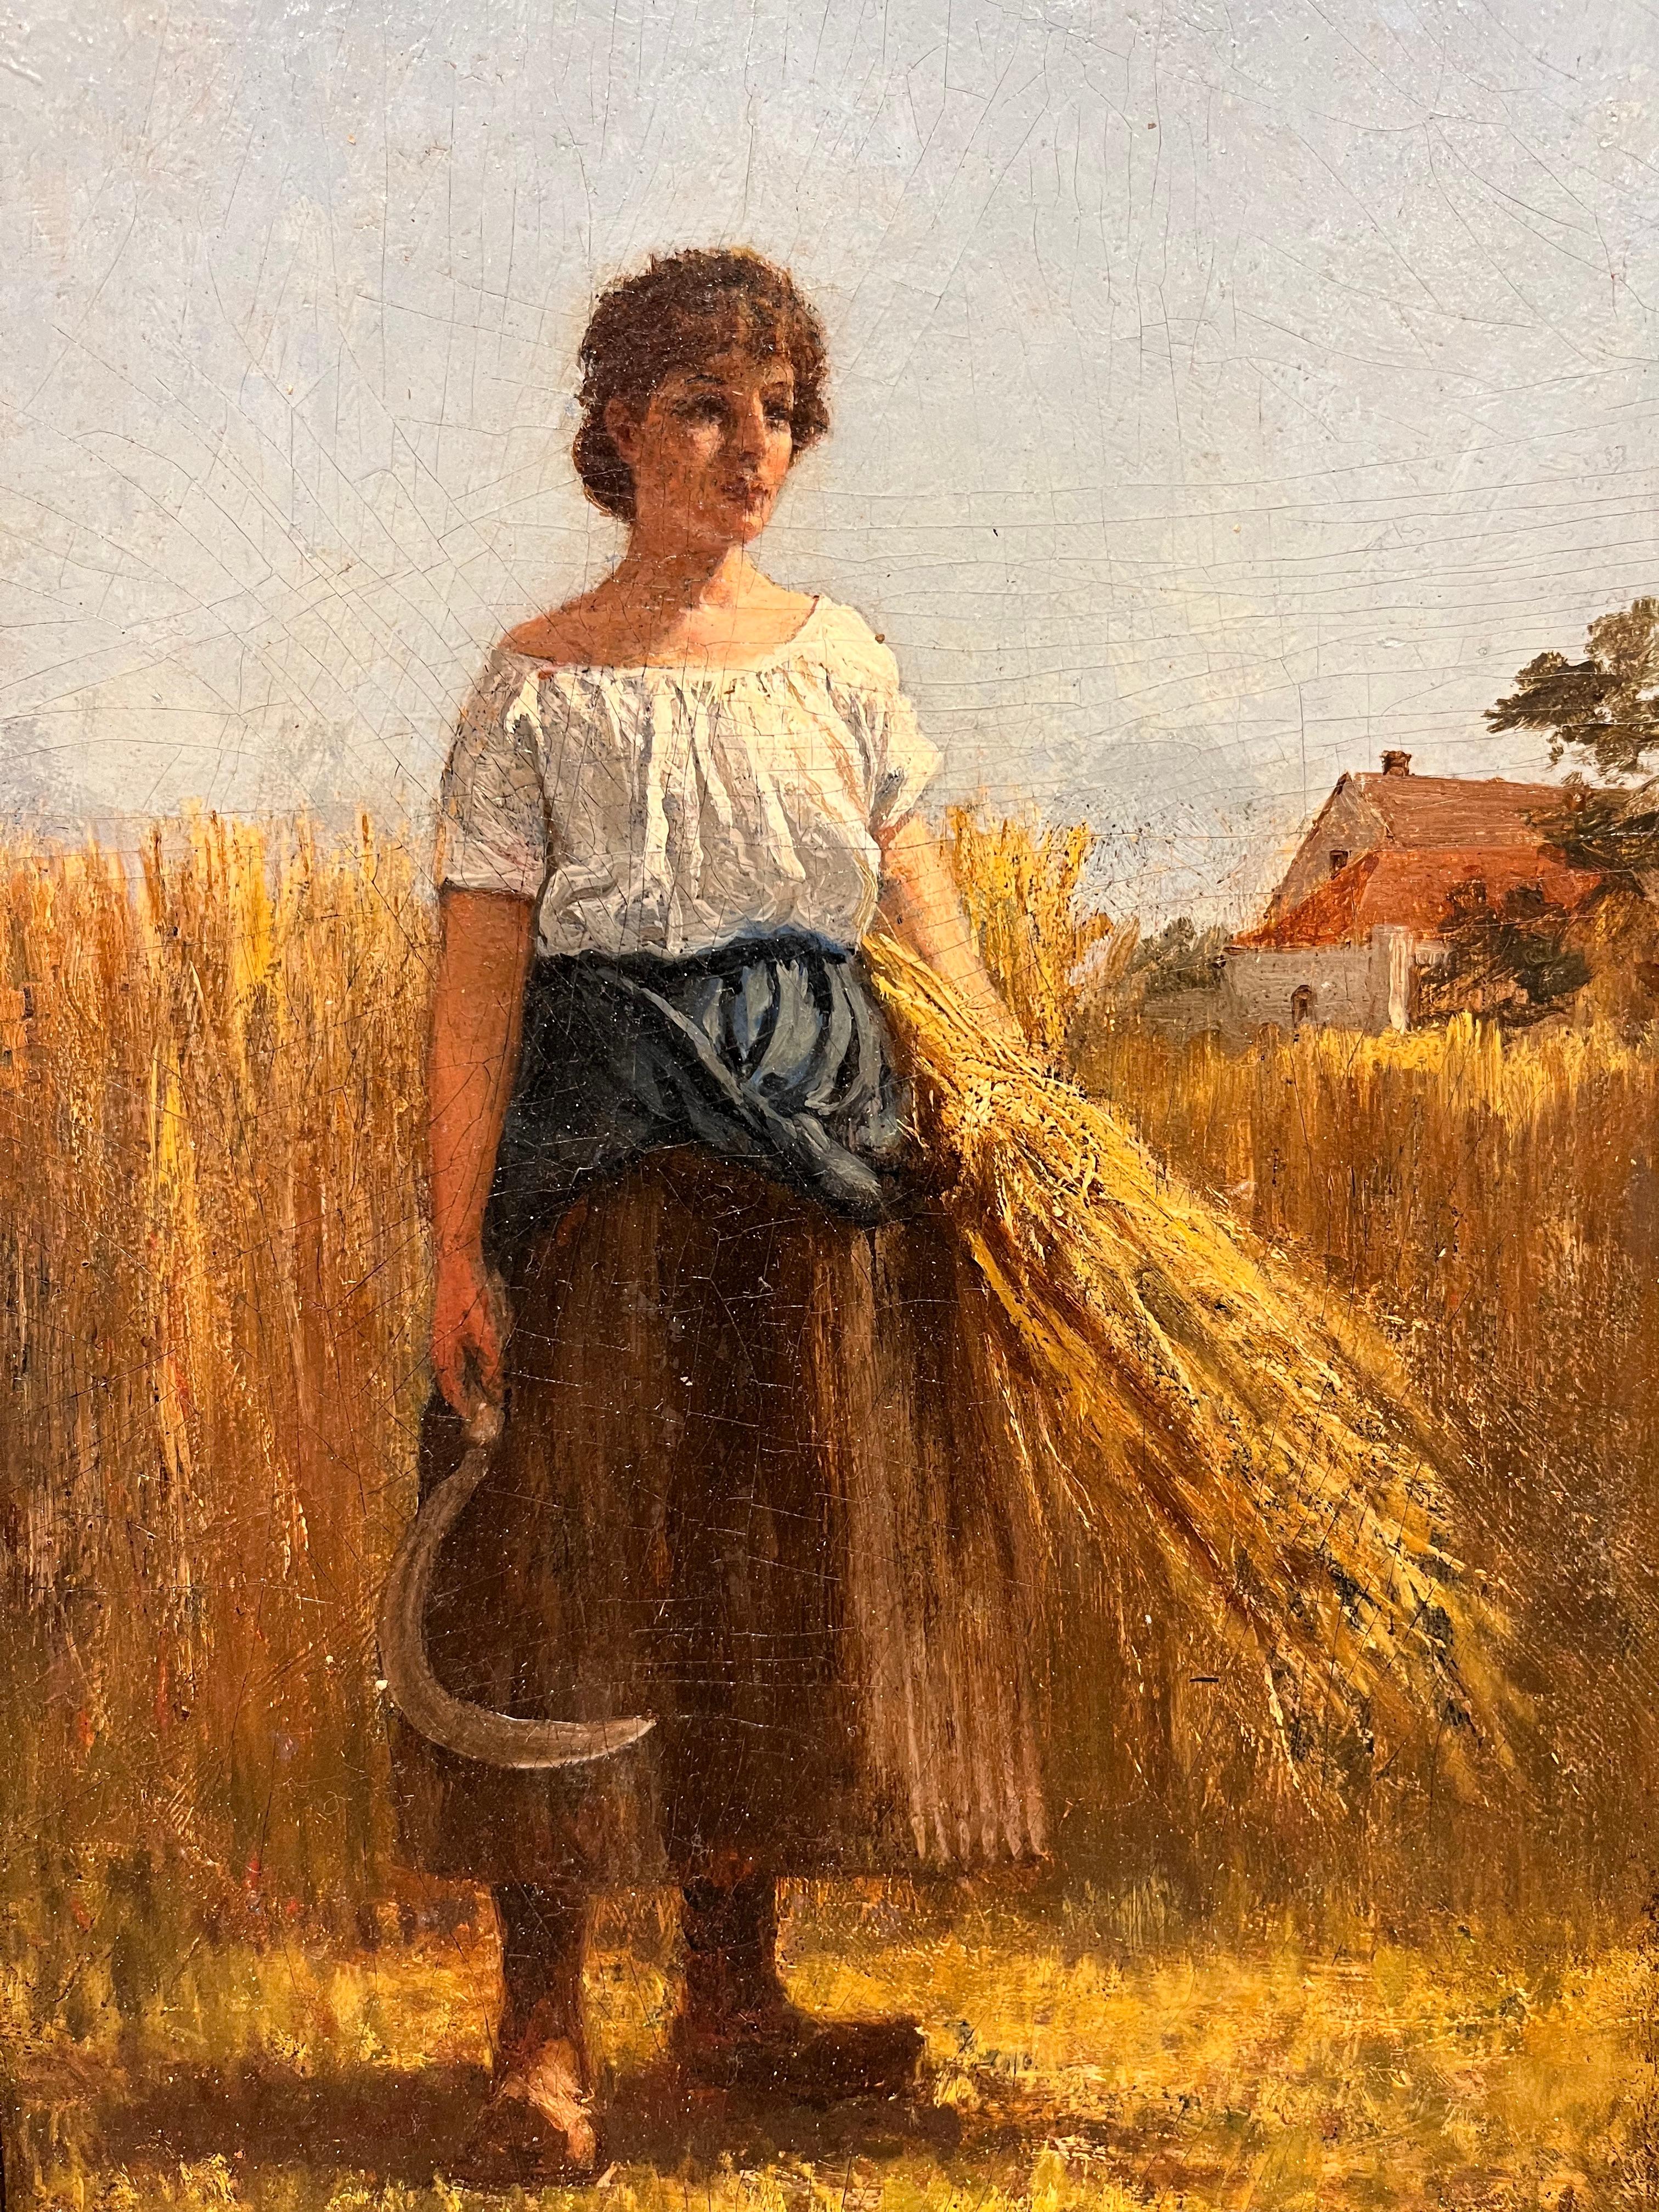 Oil Portrait of Woman in Wheat Field - Painting by William Hicok Low